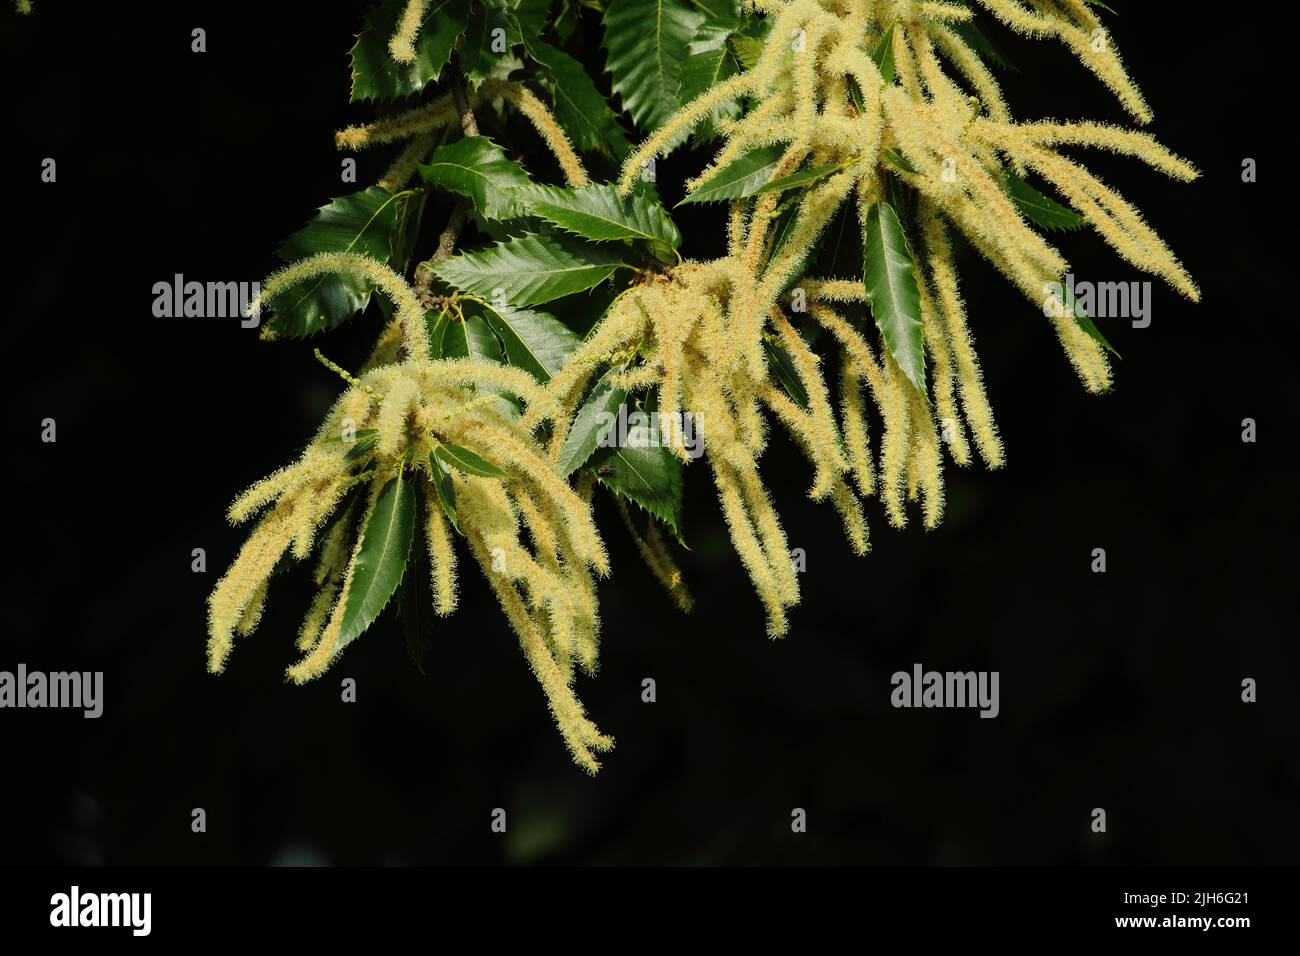 Branch with male flowers during the inflorescence of the sweet chestnut (Castanea sativa) in Neureut, Karlsruhe, Baden-Wuerttemberg, Germany Stock Photo